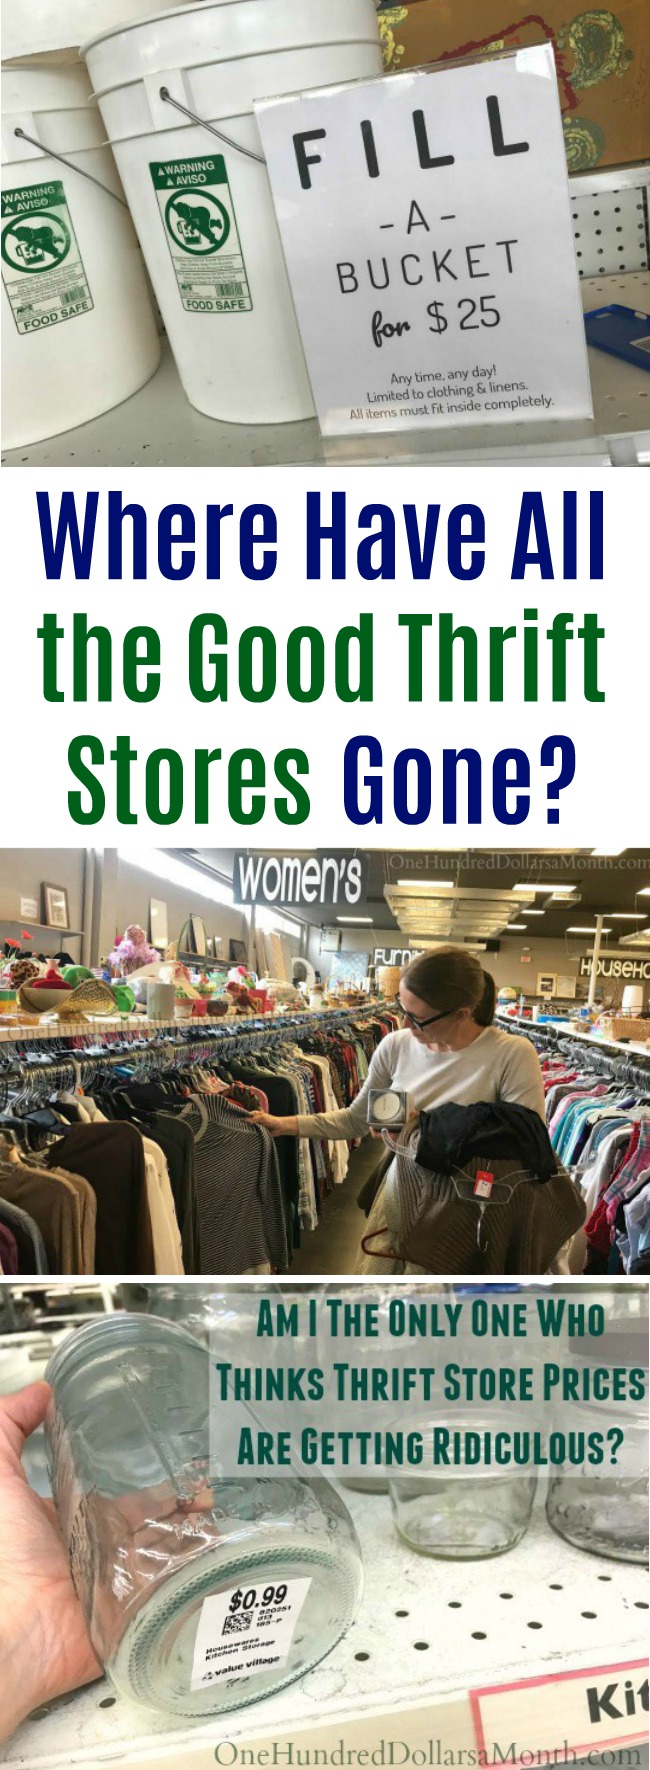 Where Have All the Good Thrift Stores Gone?